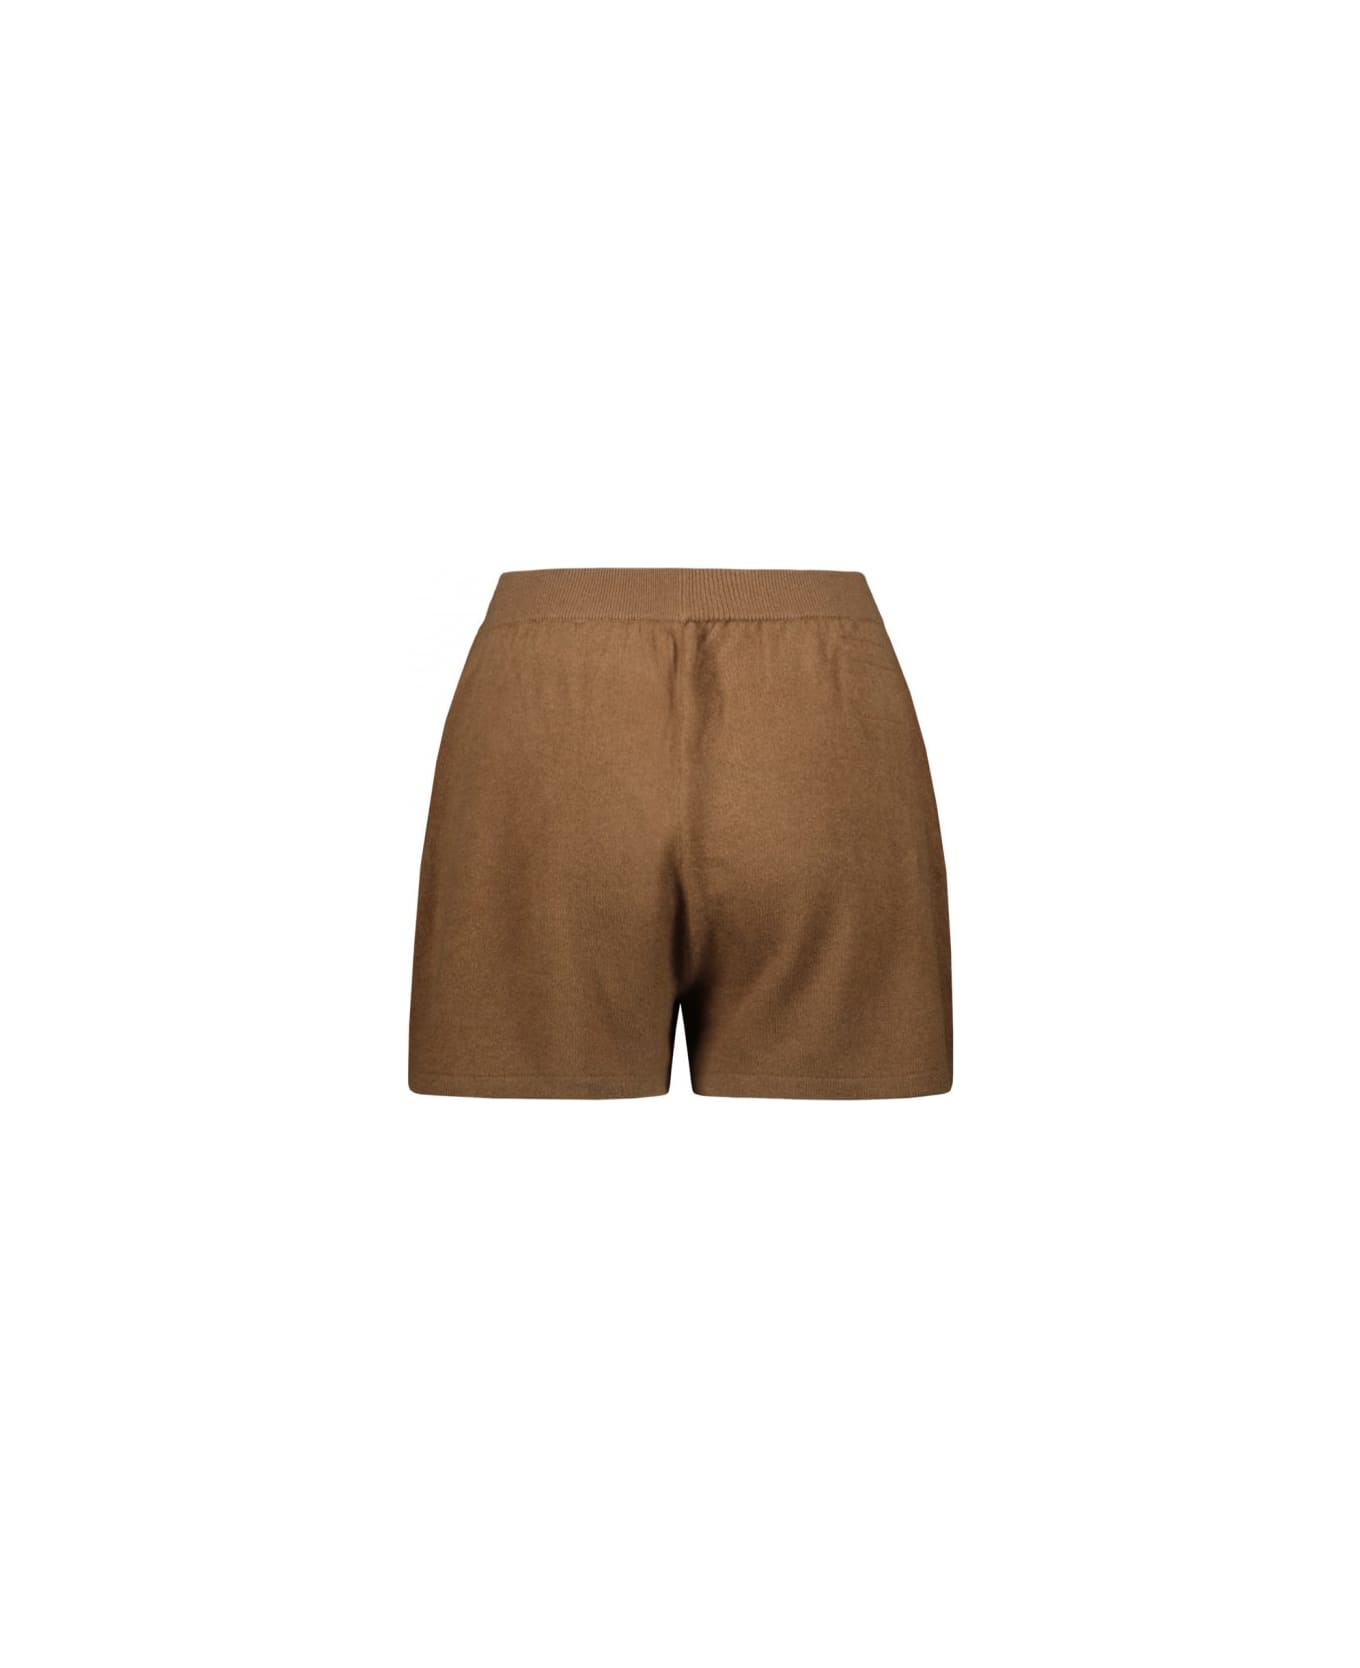 Frenckenberger Cashmere Boxers - Tan